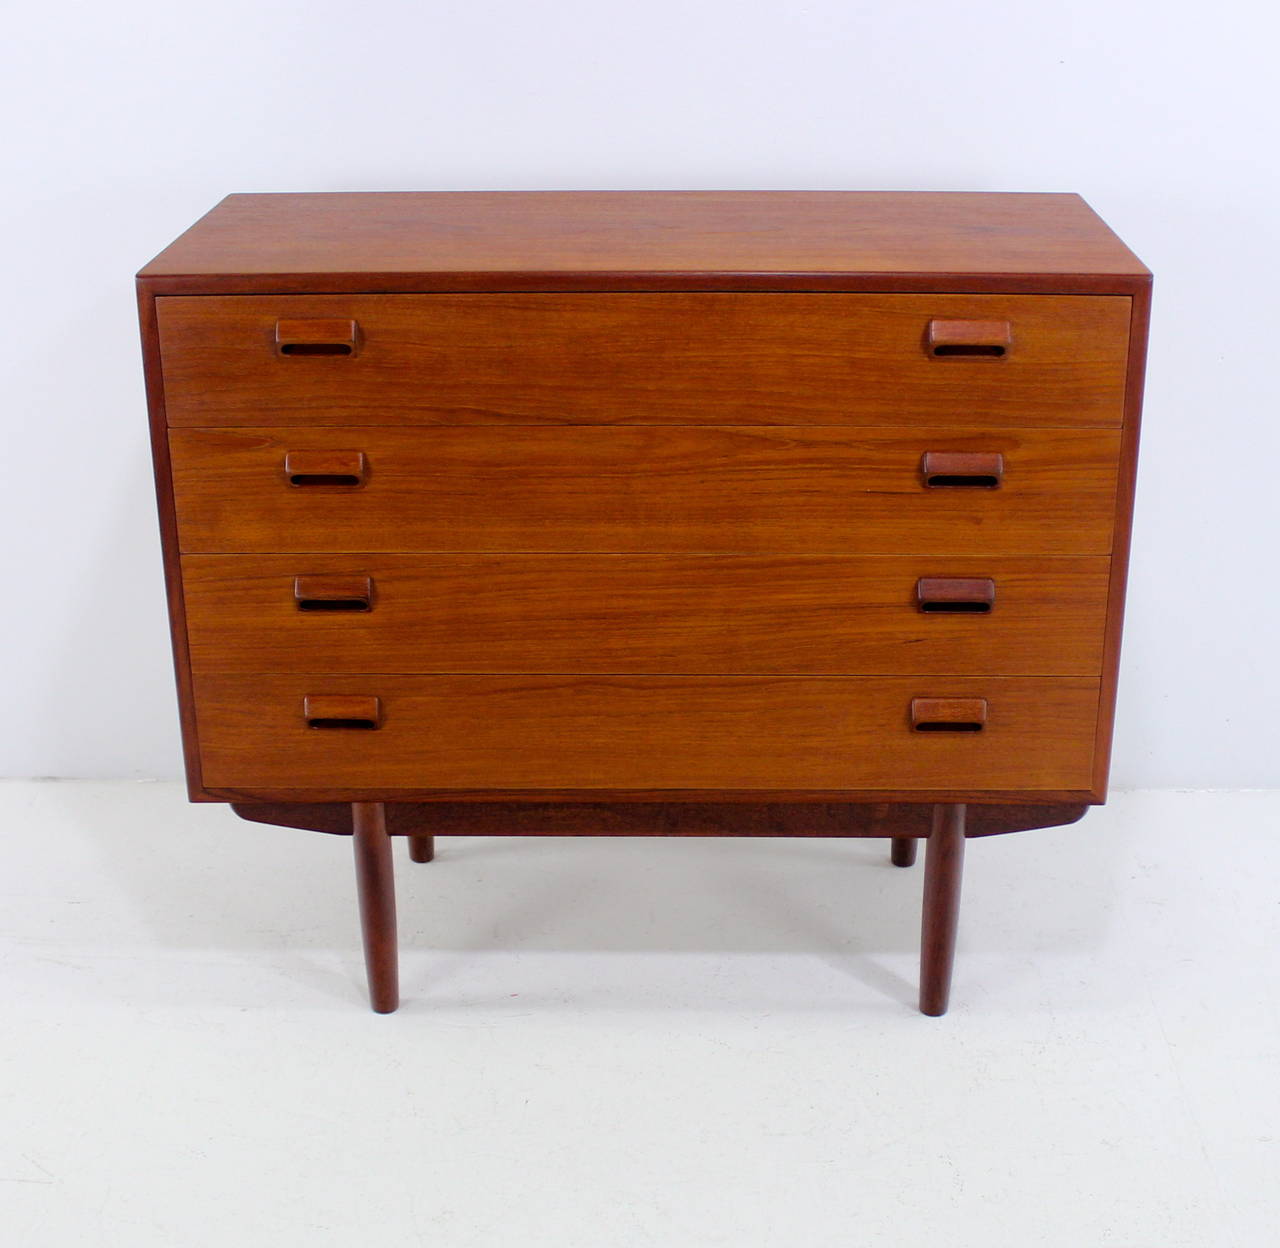 Danish modern dresser designed by Børge Mogensen.
Richly grained teak.
Four drawers with signature Mogensen scupper handles.
Signature Mogensen cross frame base.
Matching vanity listed separately.
Professionally restored and refinished by